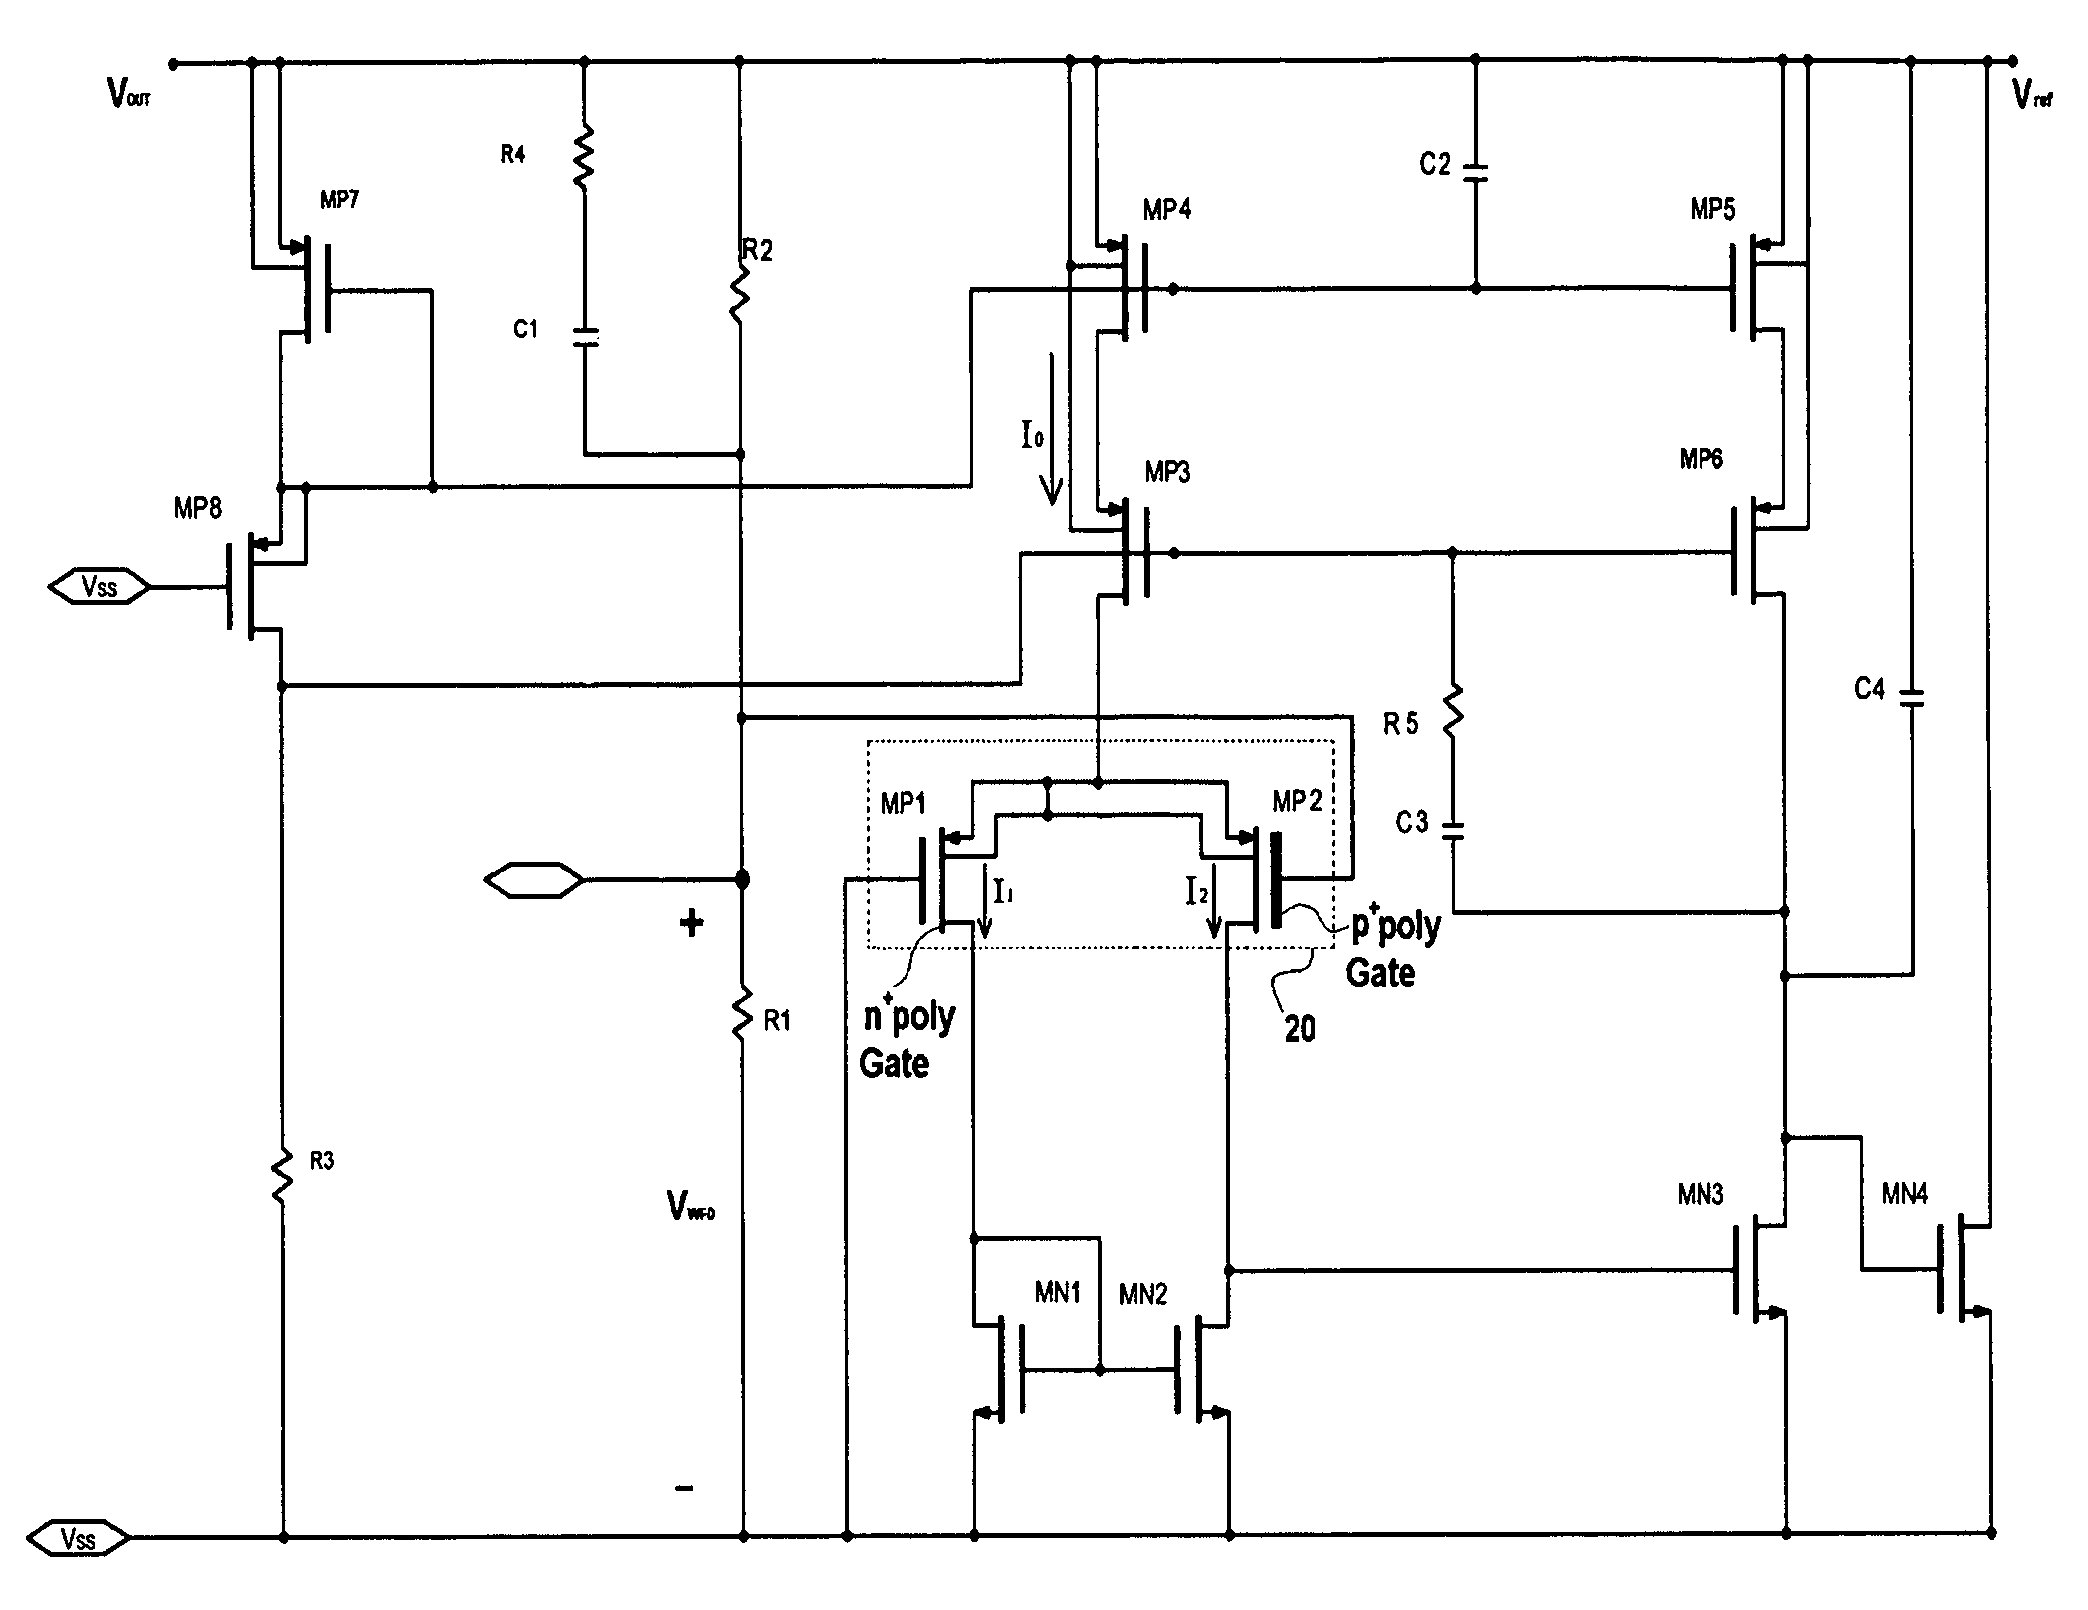 Low-power voltage reference